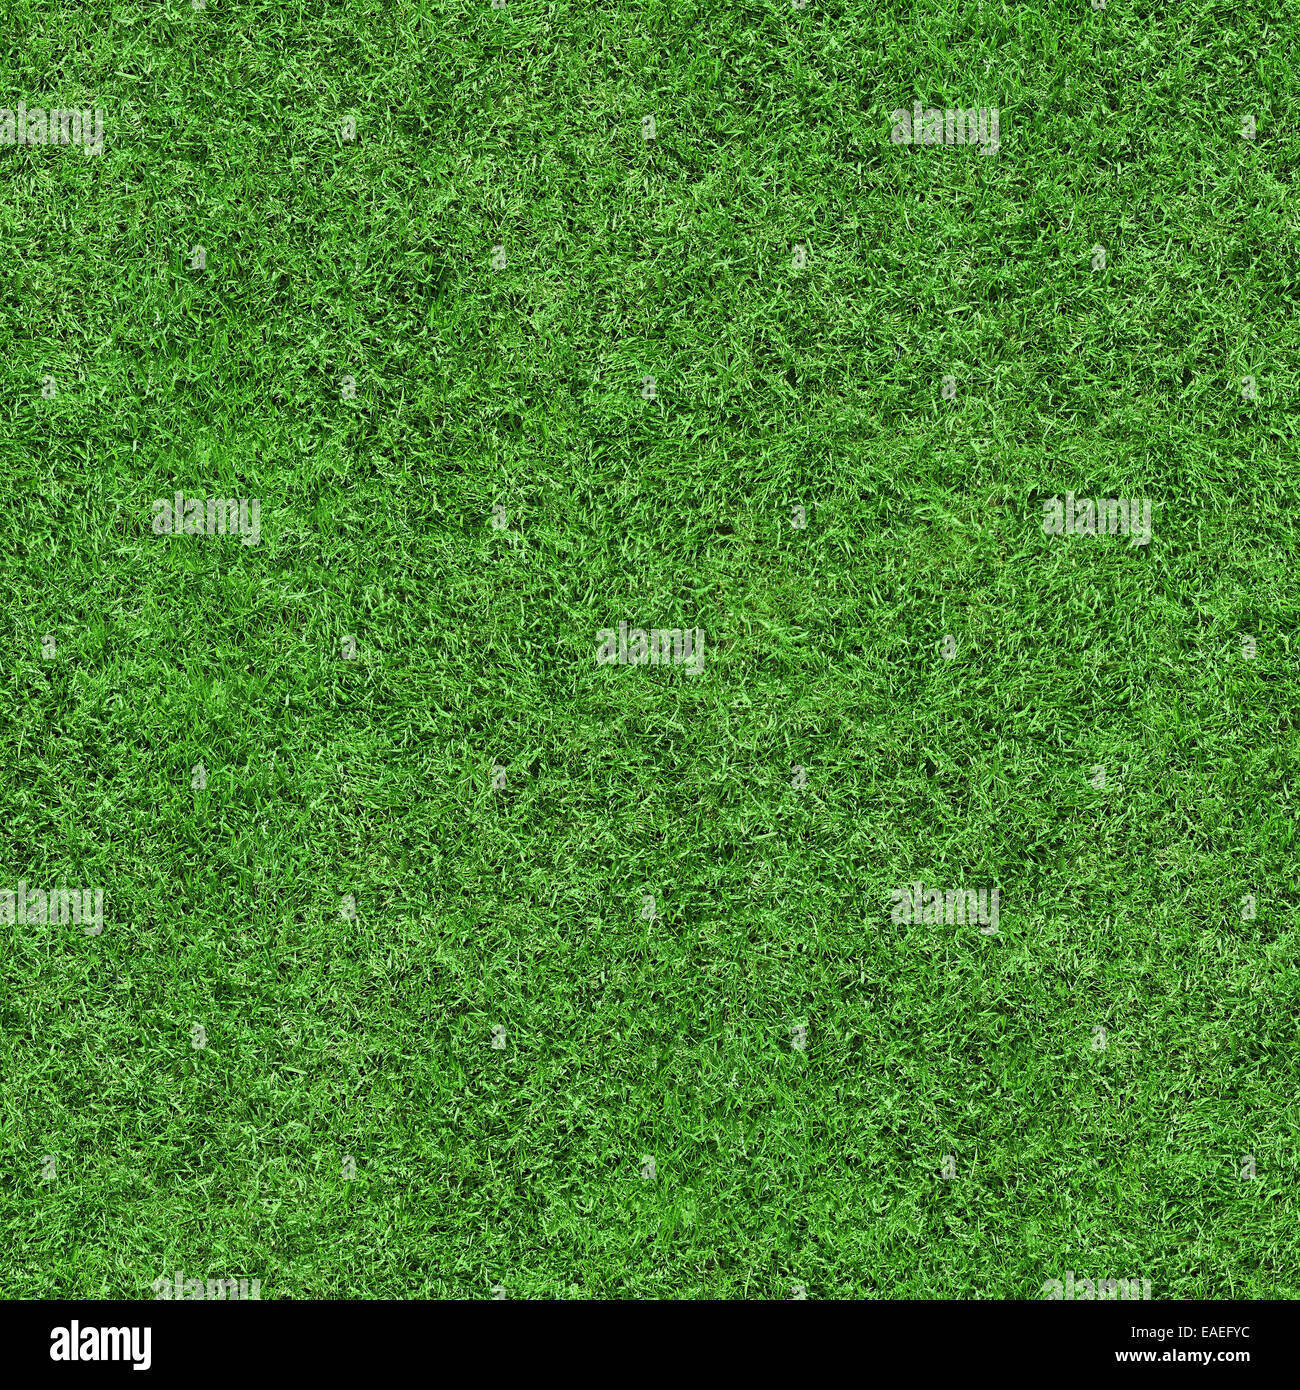 Green grass texture seamless background, perfect for nature, environment, sport and more... Stock Photo